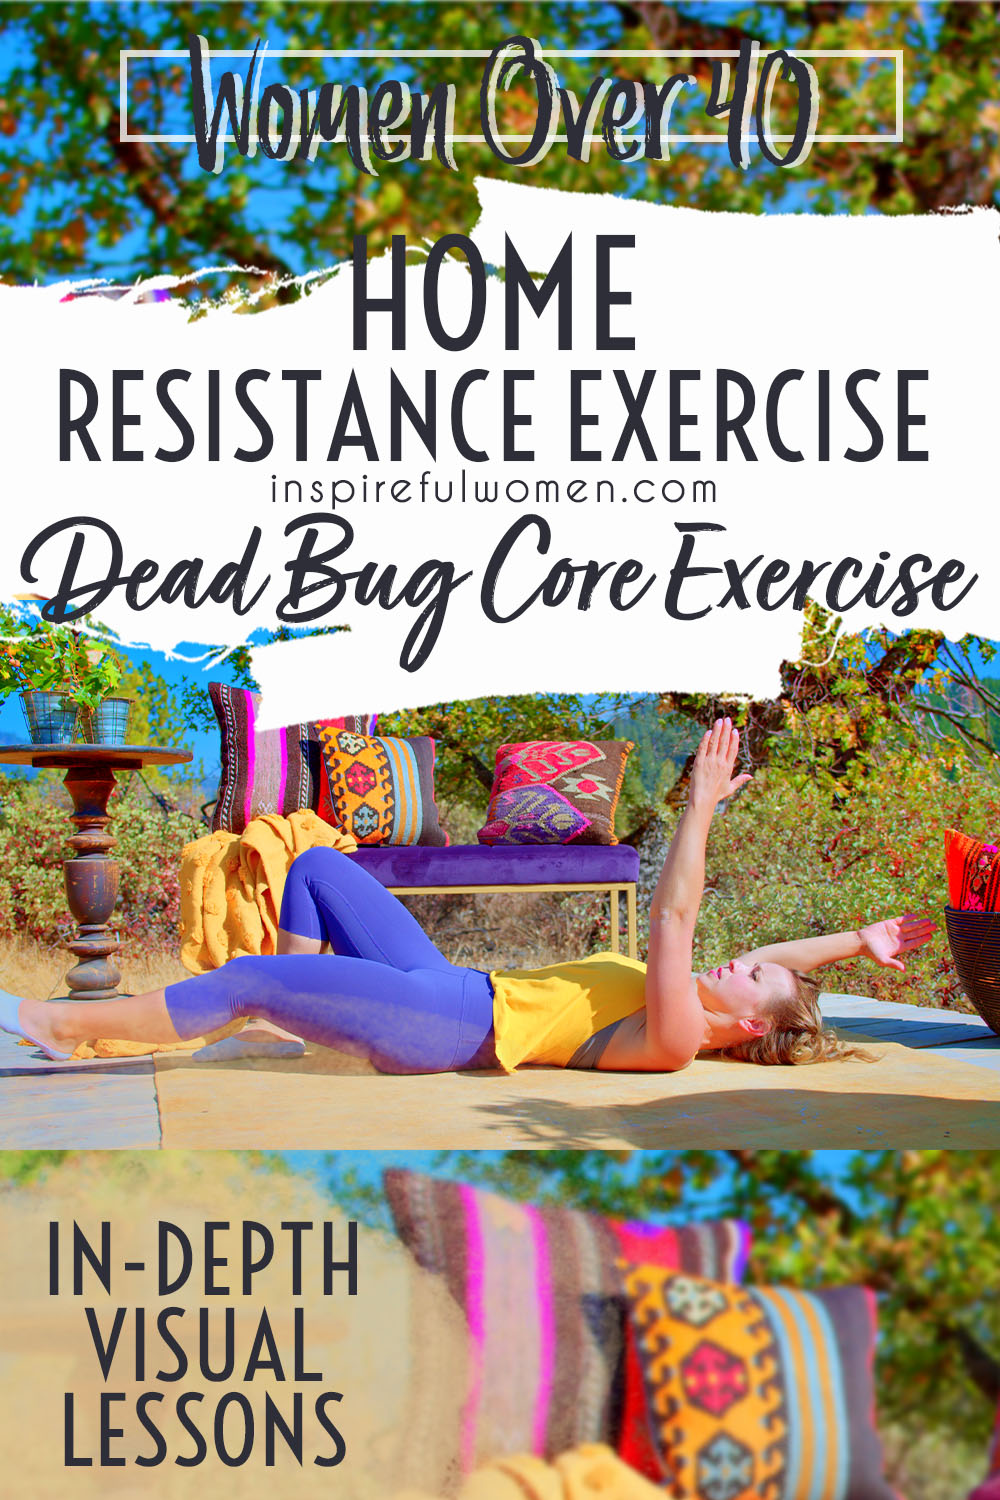 dead-bug-core-exercise-abdominals-strengthening-workout-women-over-40